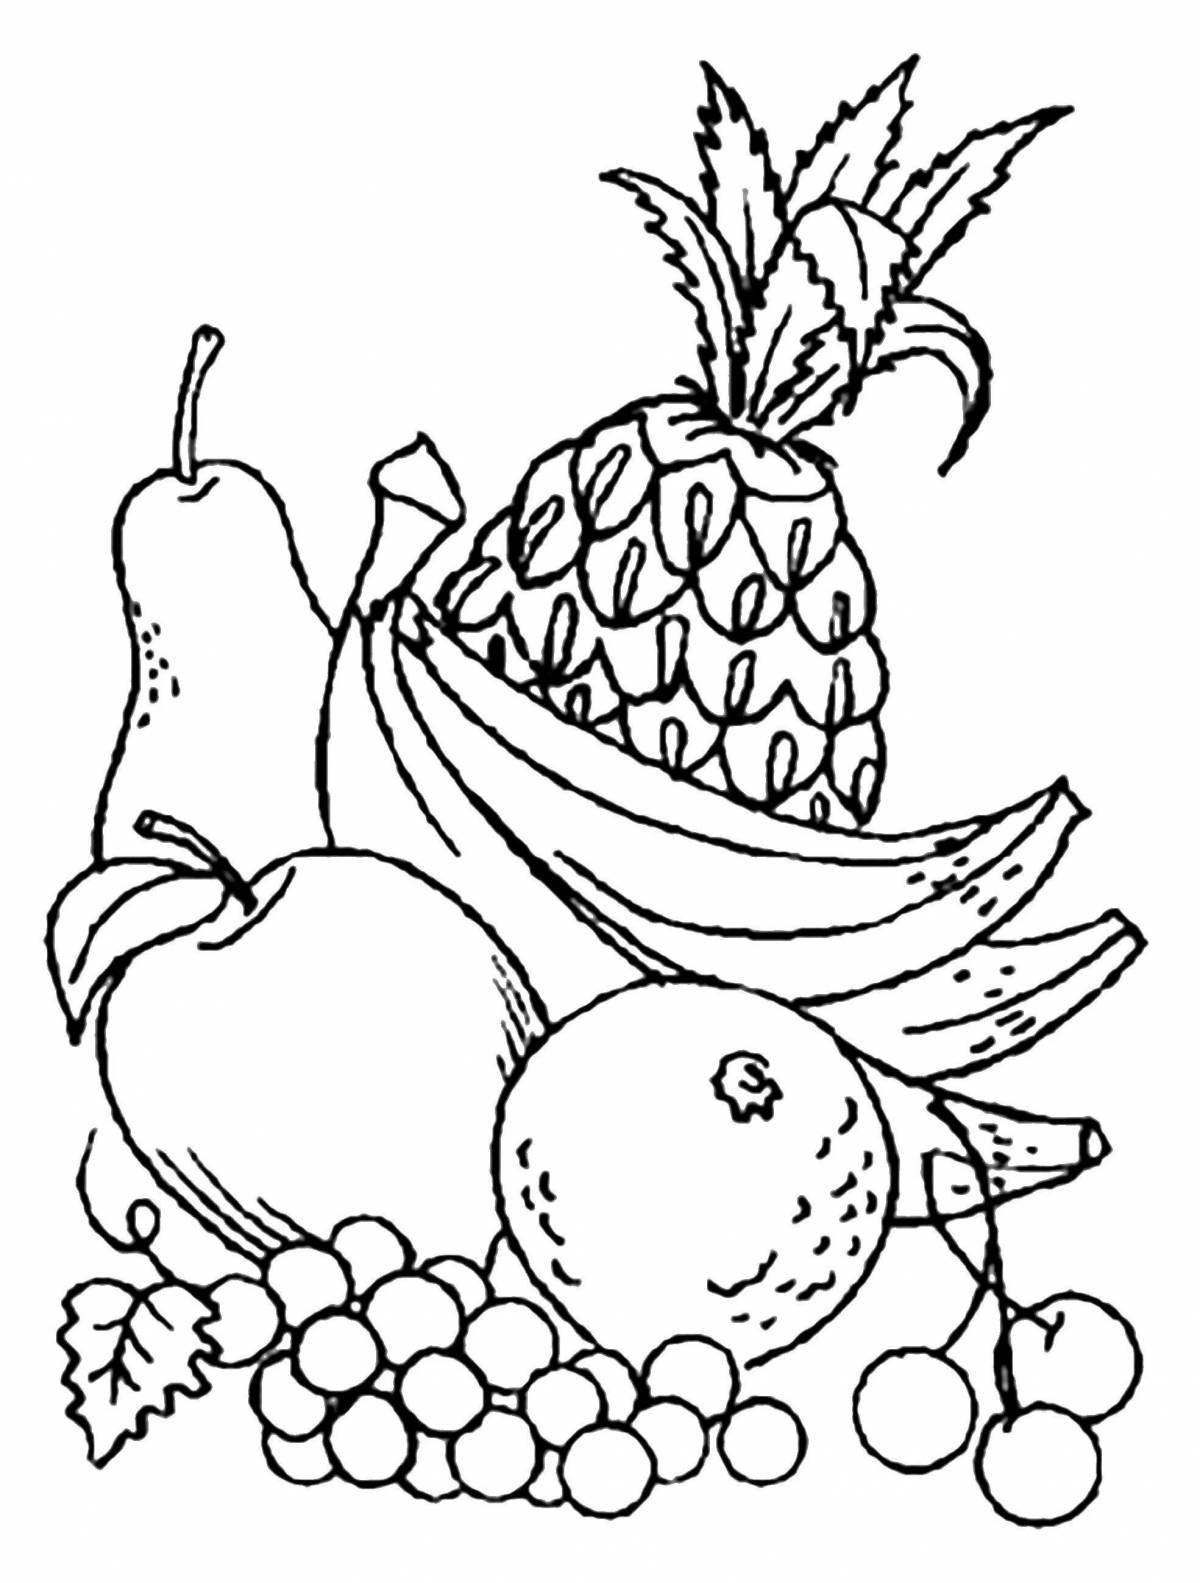 Vibrant gemister coloring page